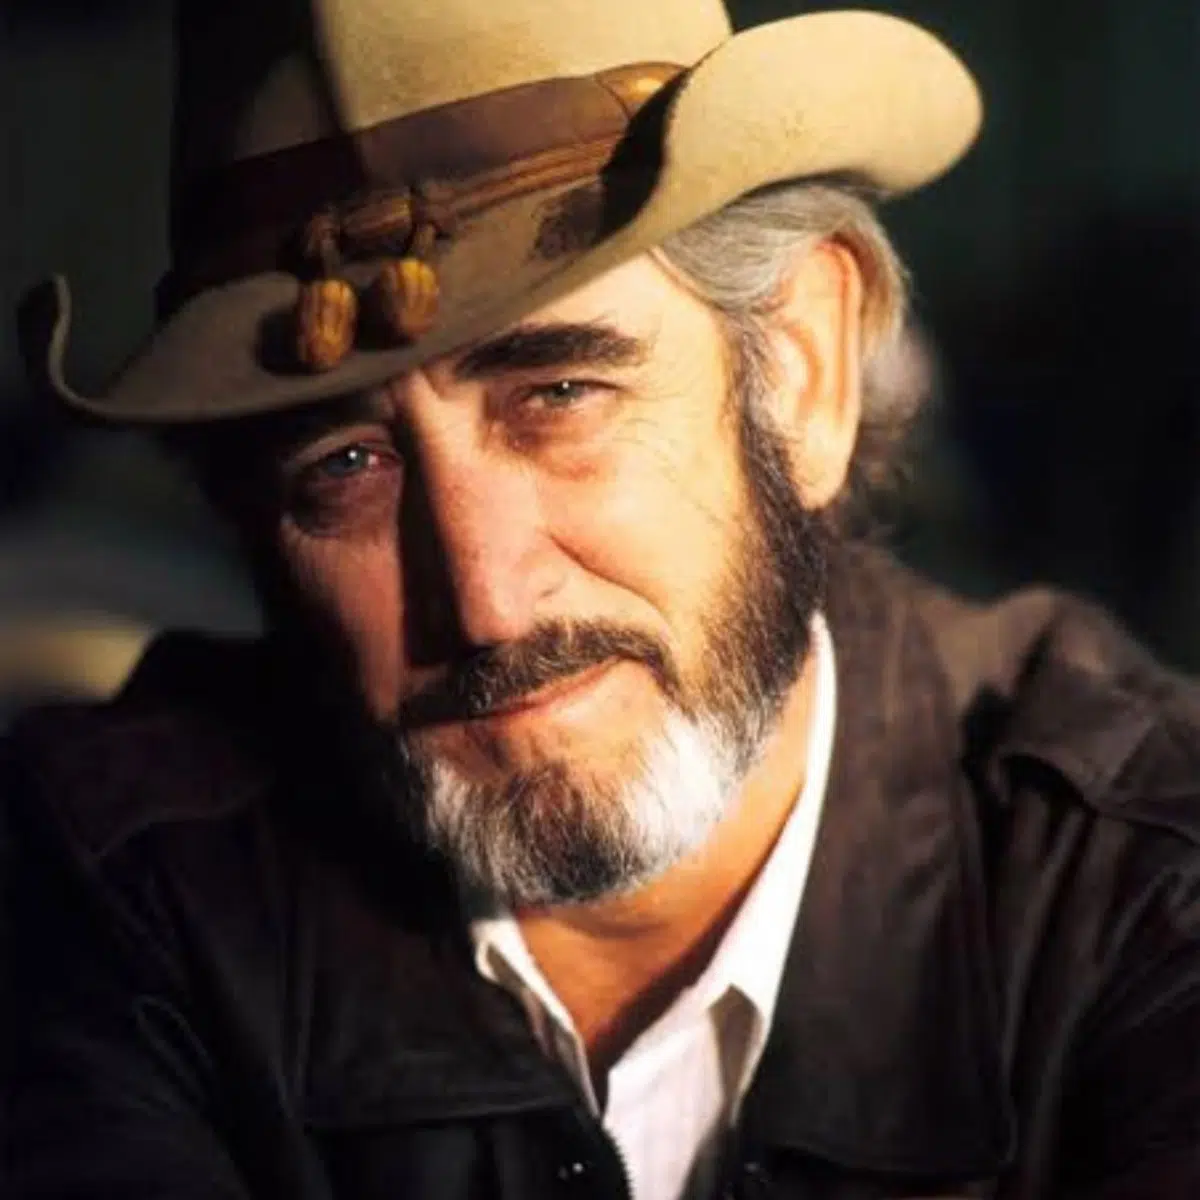 DOWNLOAD: Don Williams – “Desperately” (Loving You) Mp3